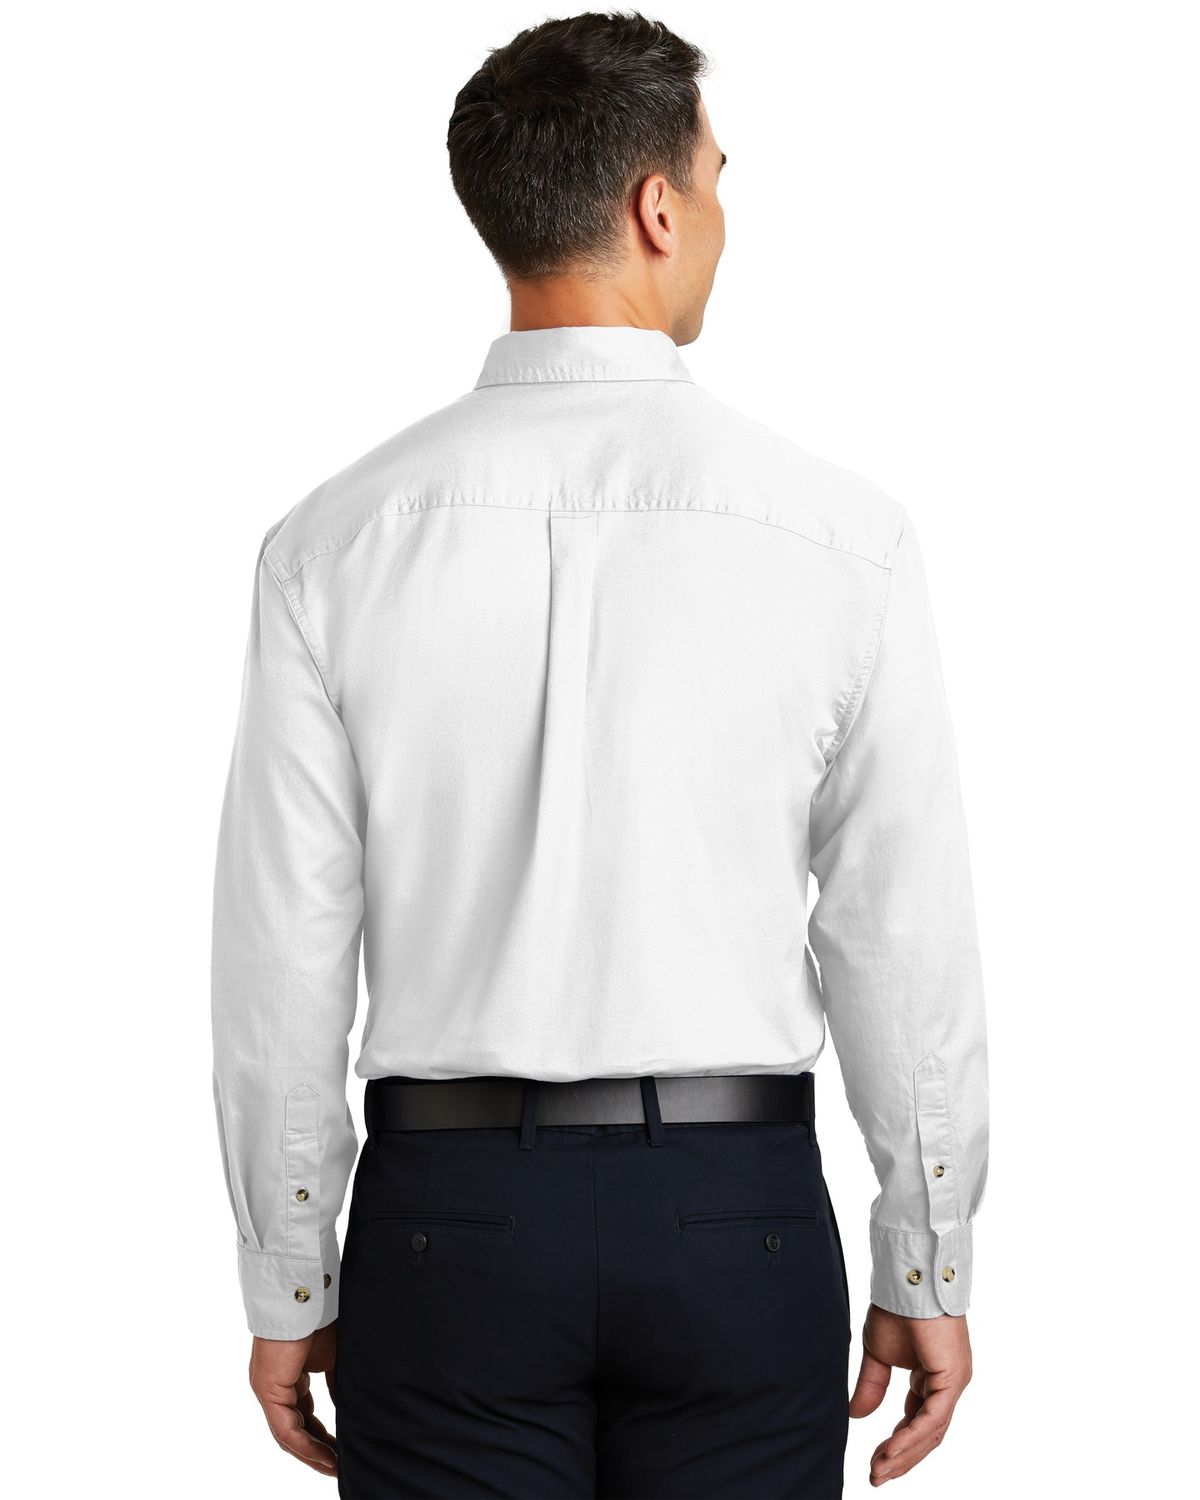 'Port Authority S600T Long Sleeve Twill'